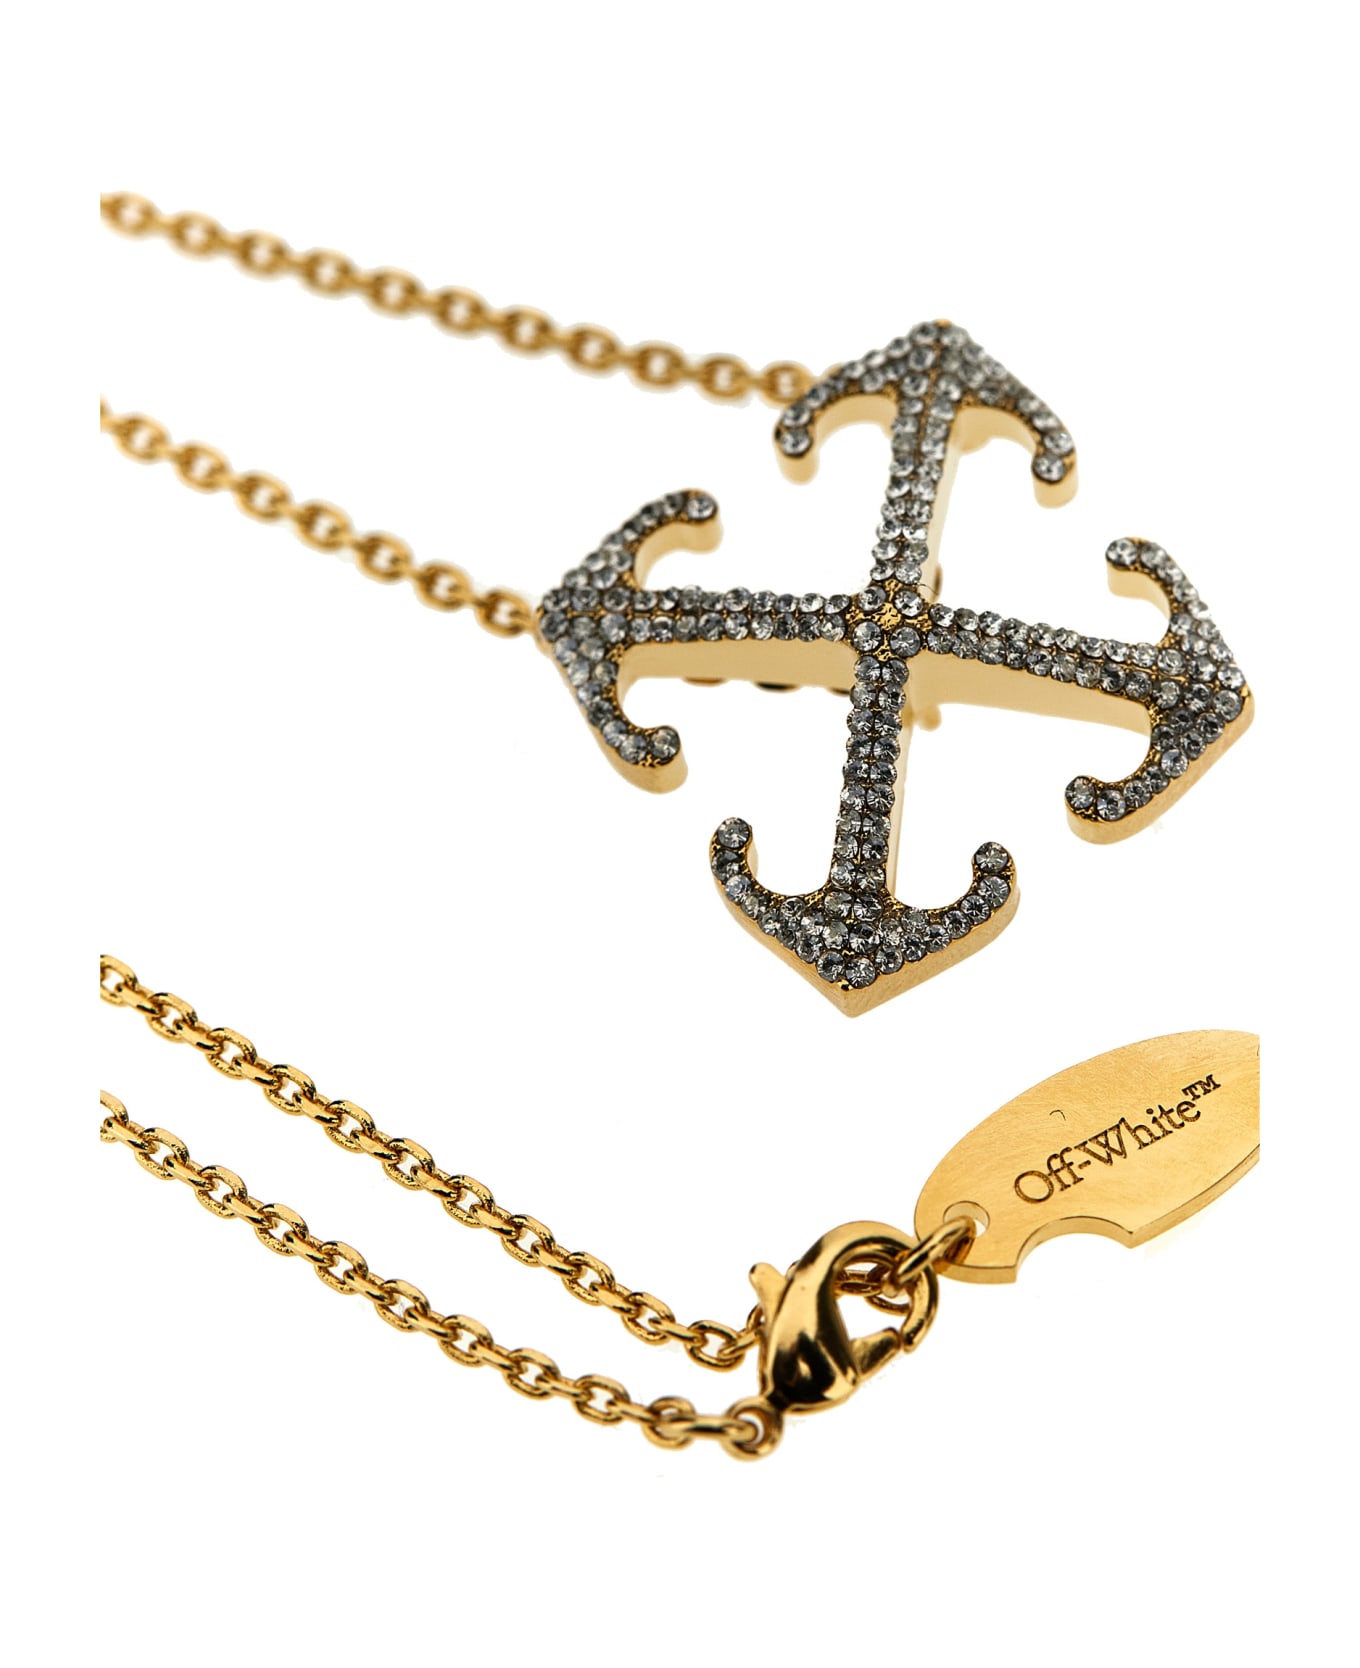 Off-White 'arrow Strass' Necklace - Gold